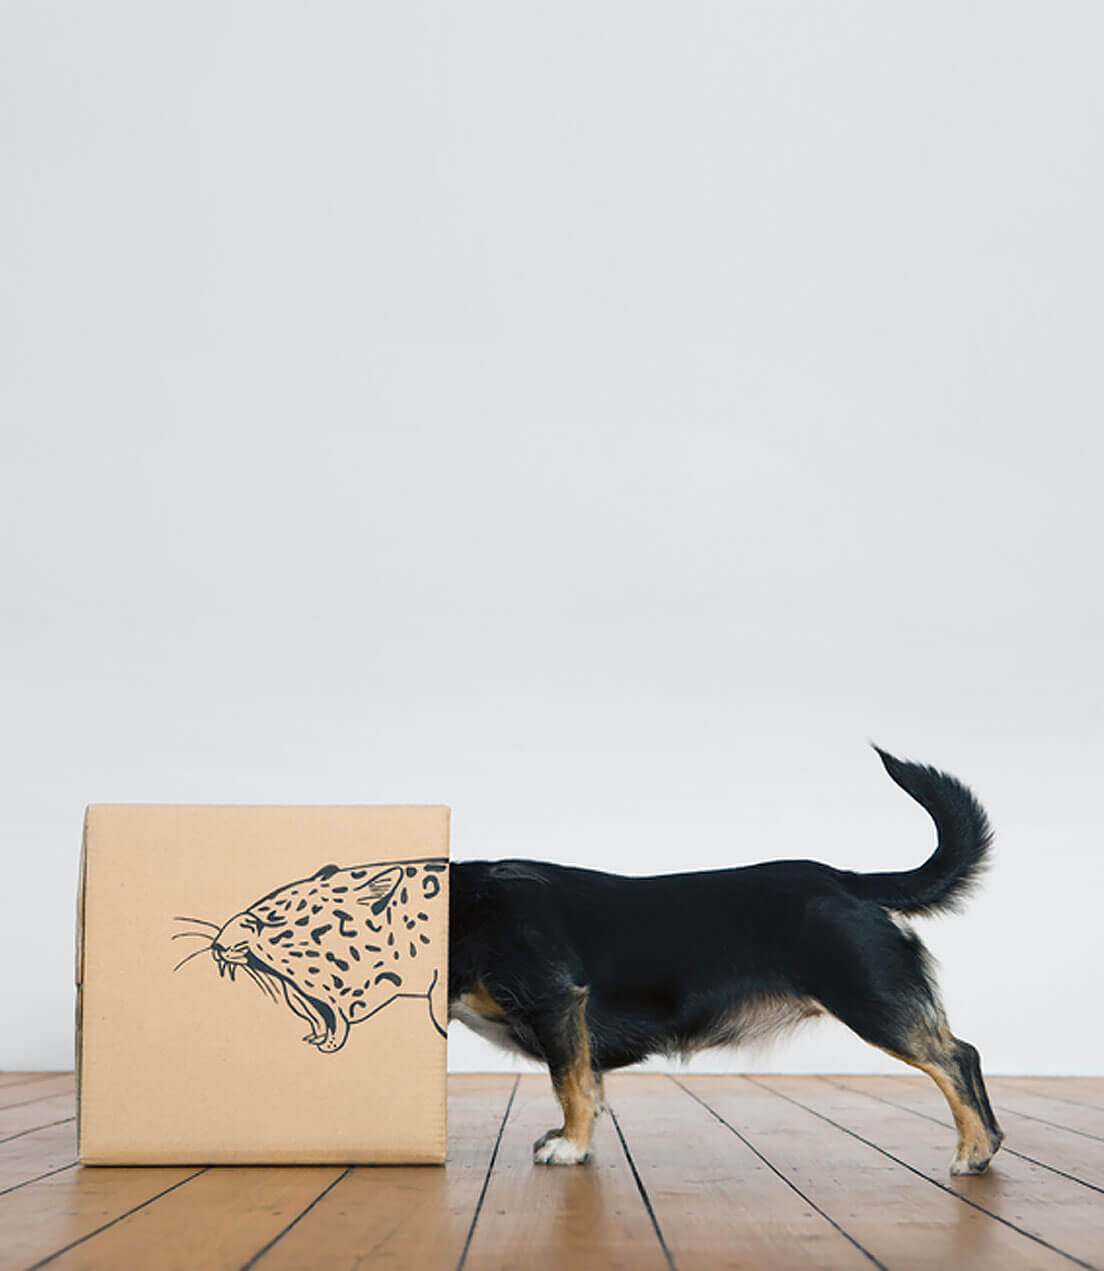 Roaring dog inside a cardboard box transforming and branding it to make it look like a leopard in the digital jungle